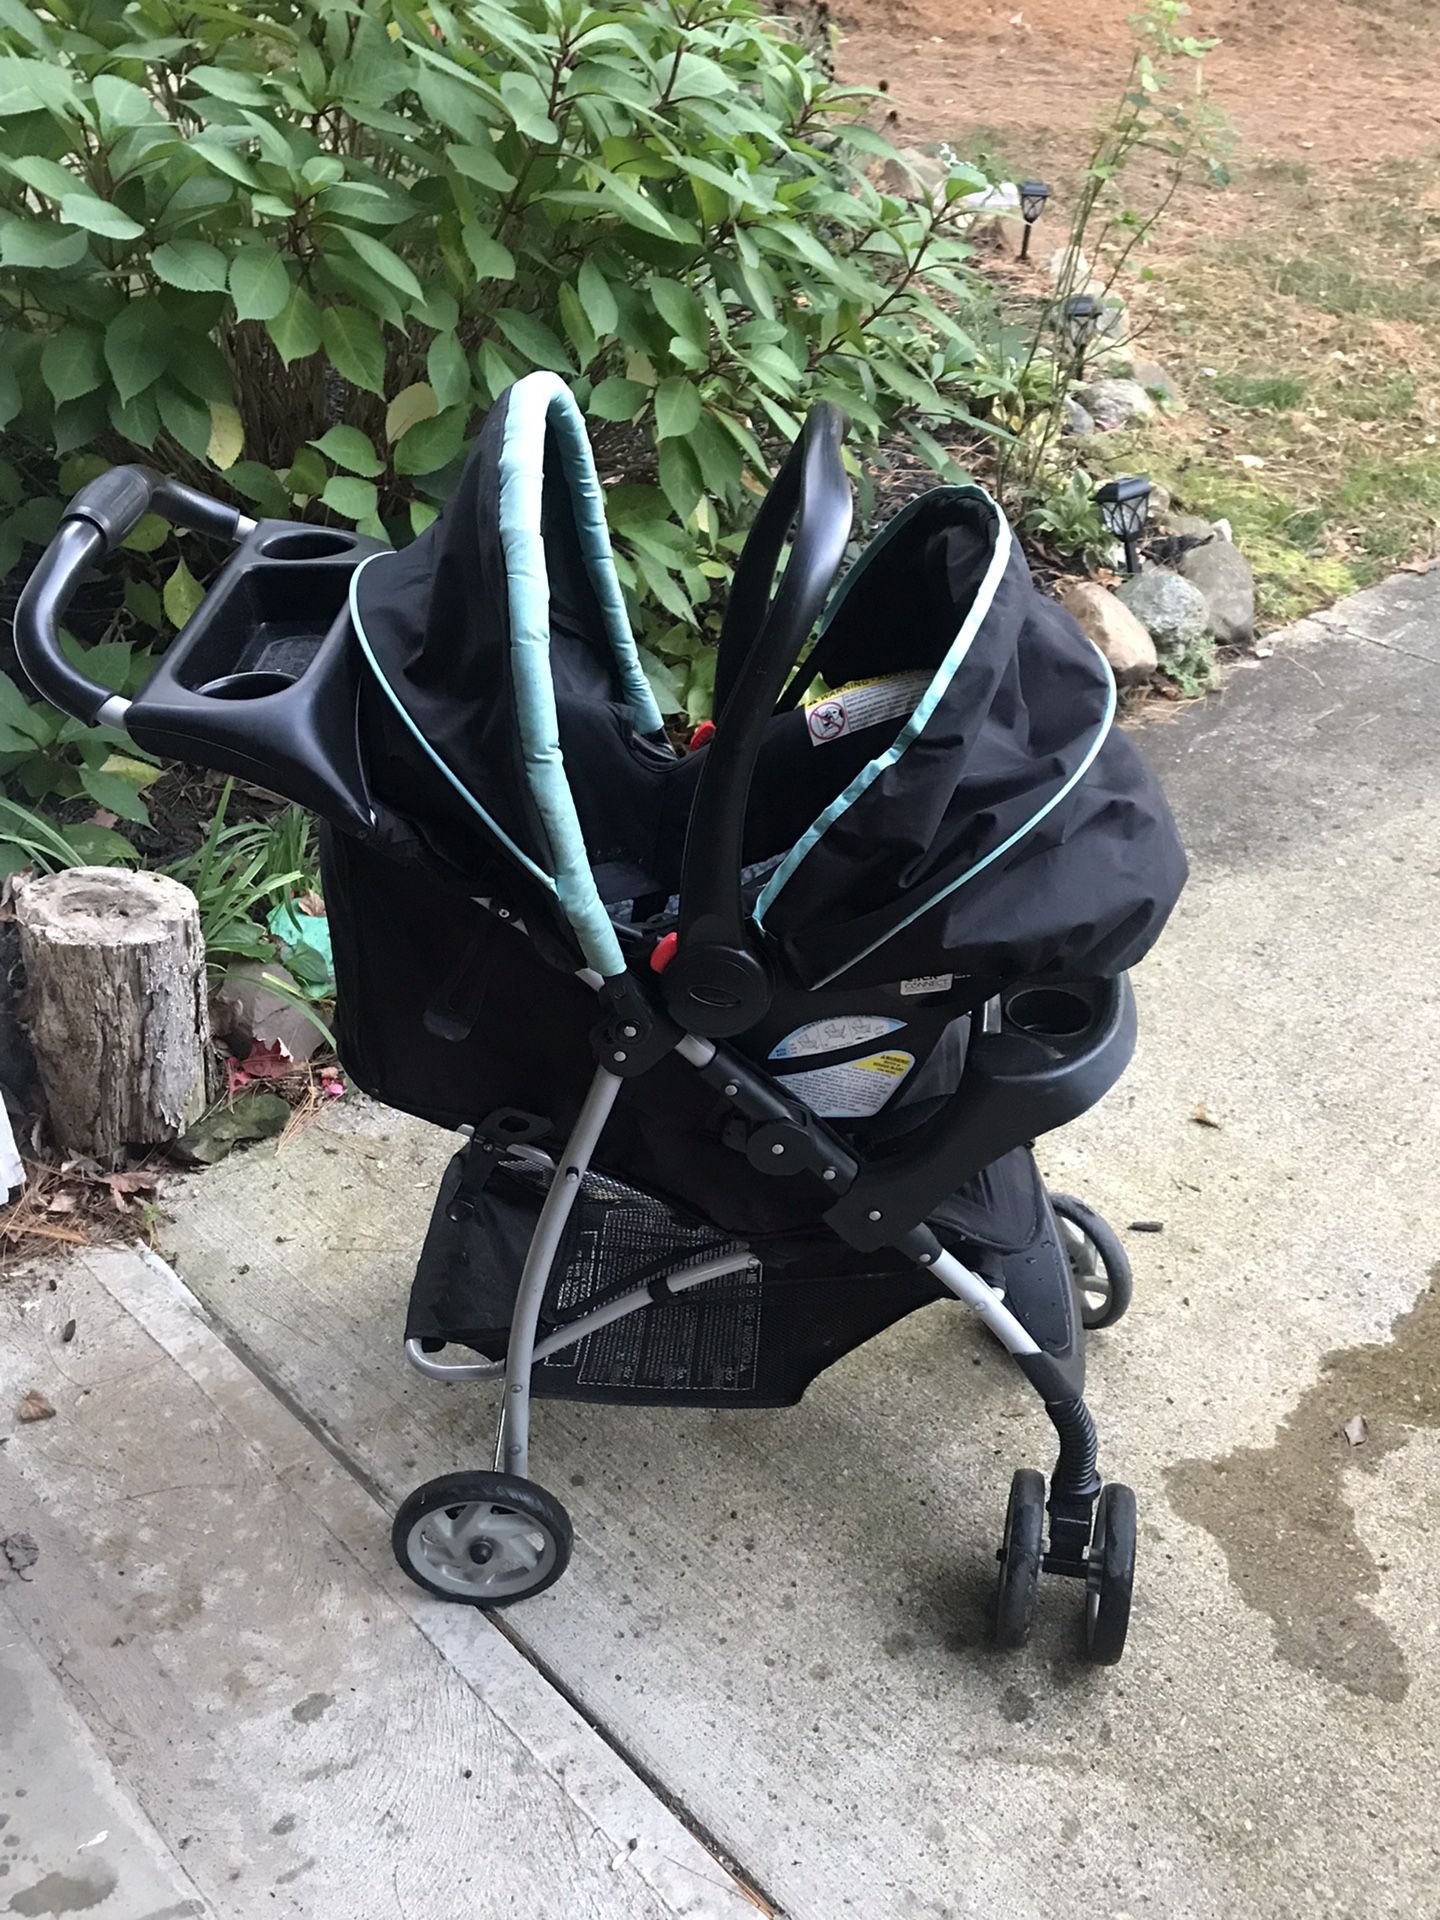 Used  Graco &Chicco Stroller  plus Car Seat